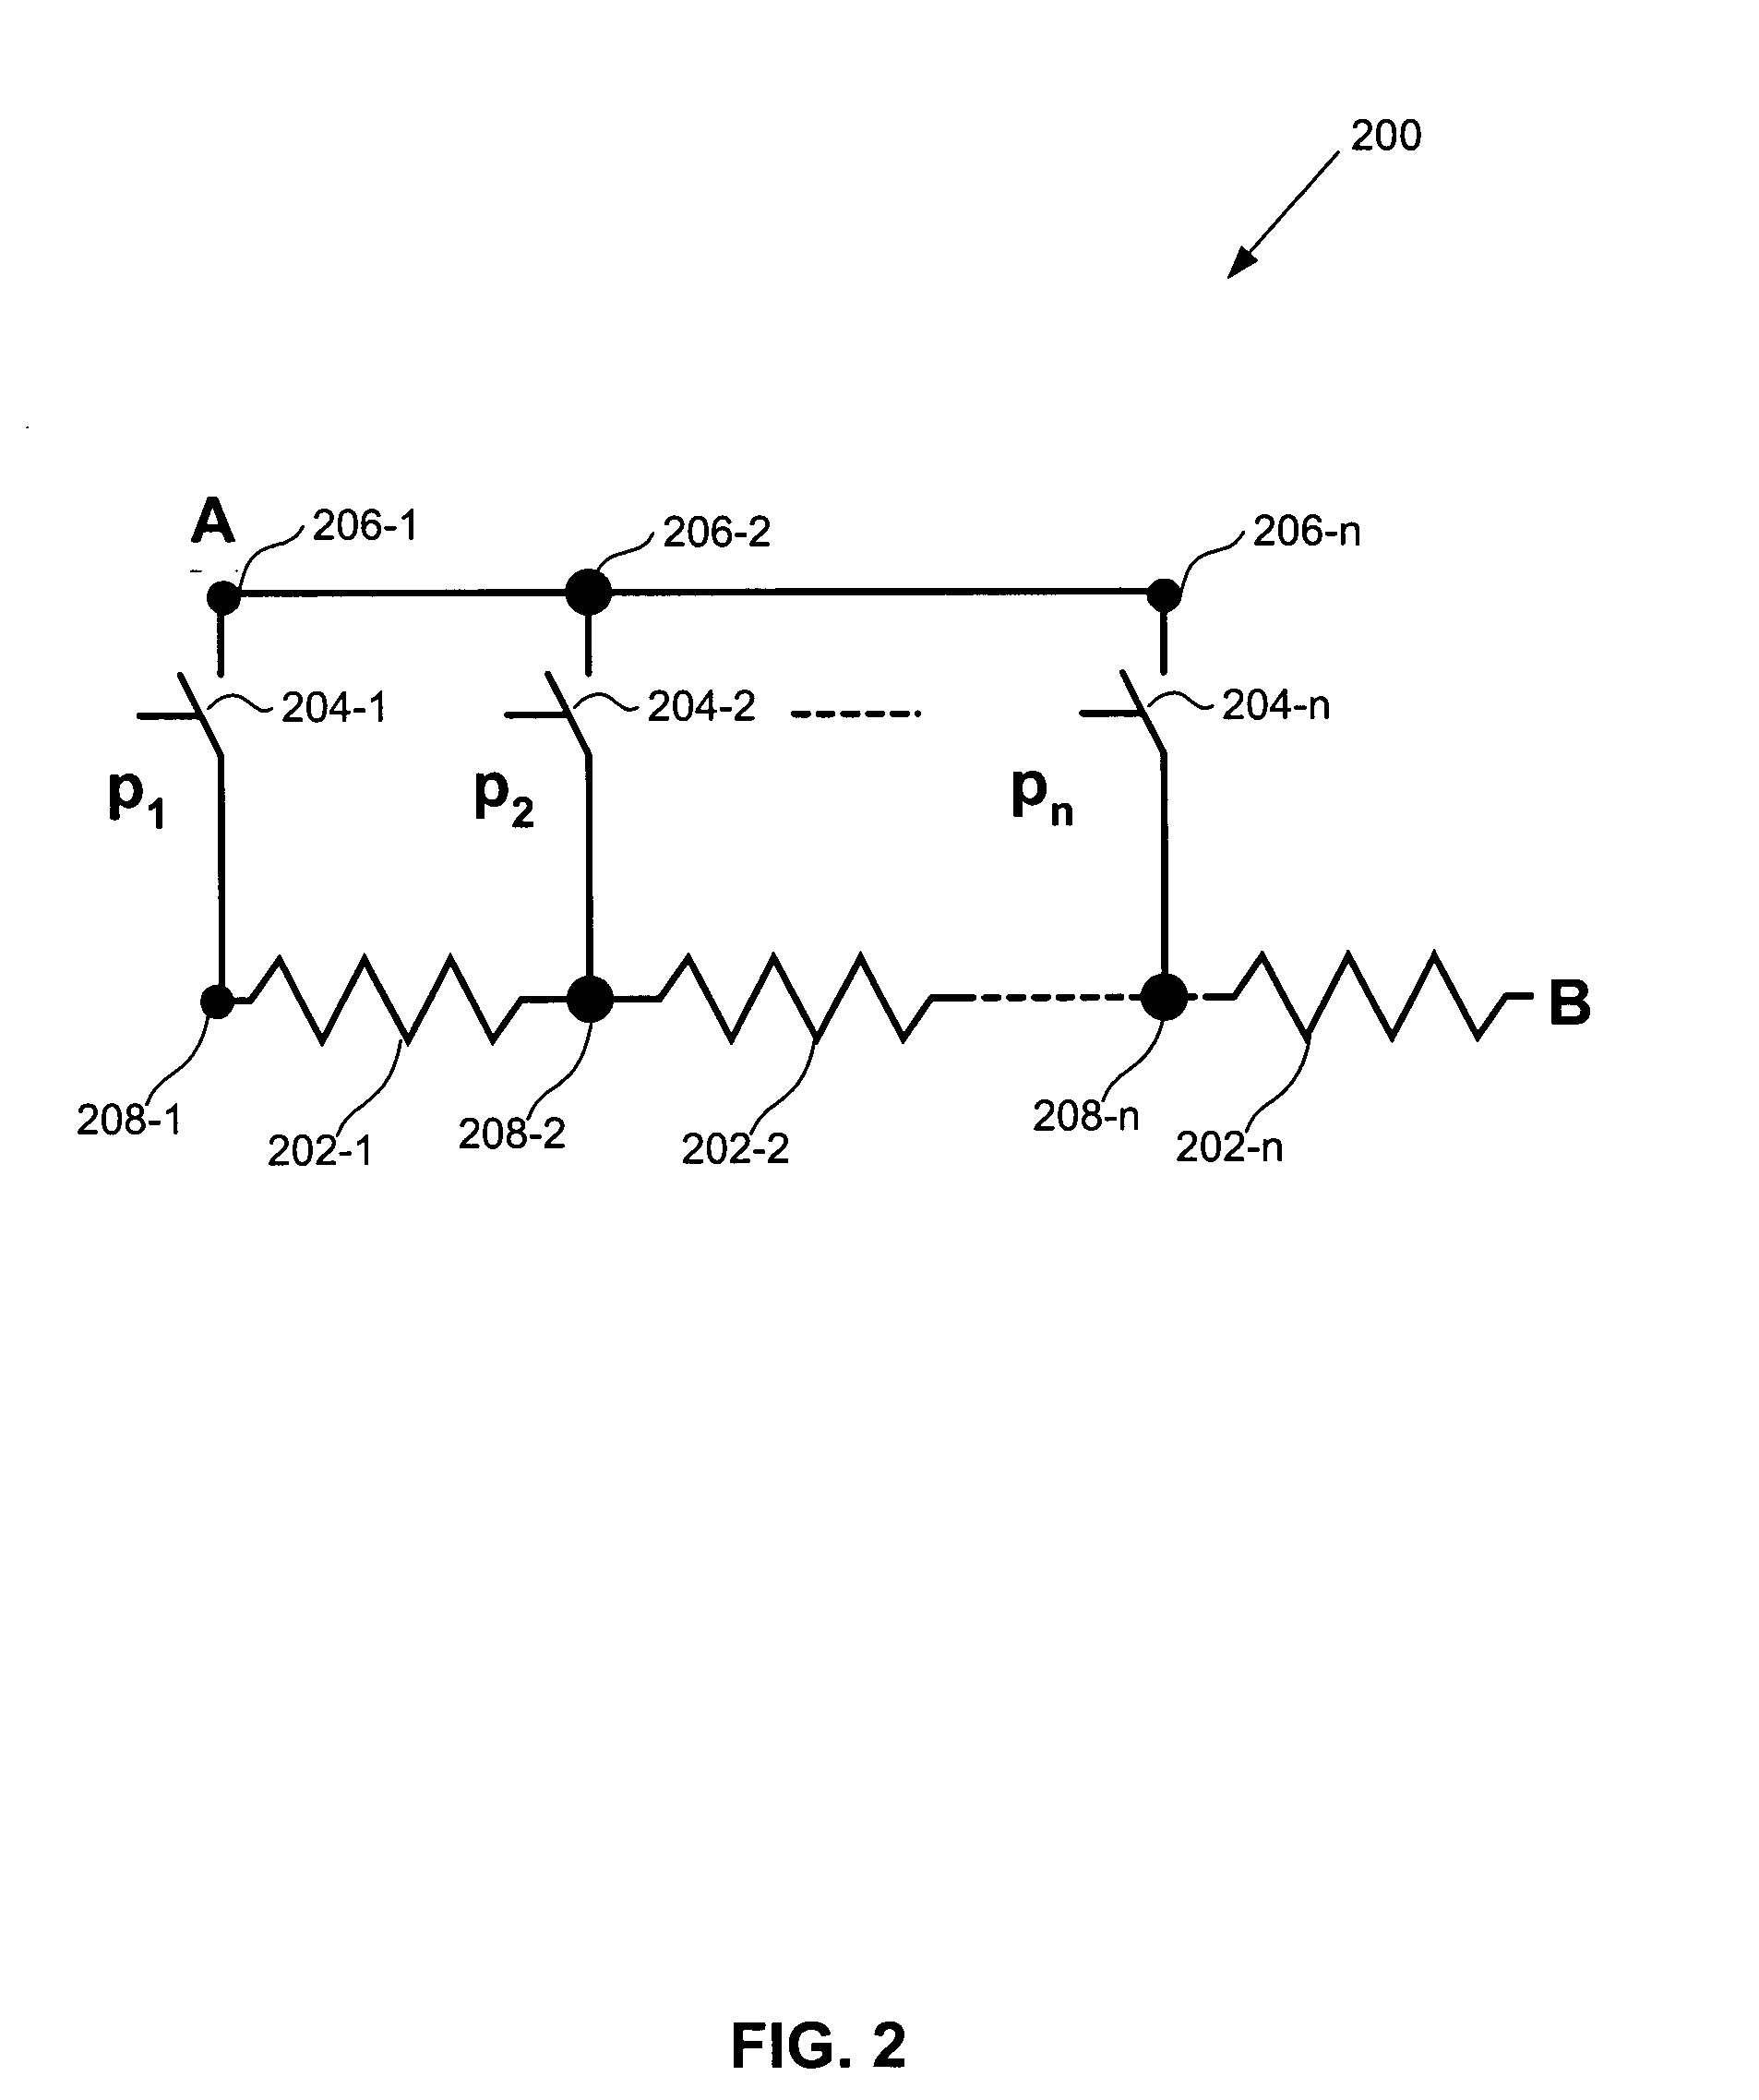 High-linearity switched-resistor network for programmability